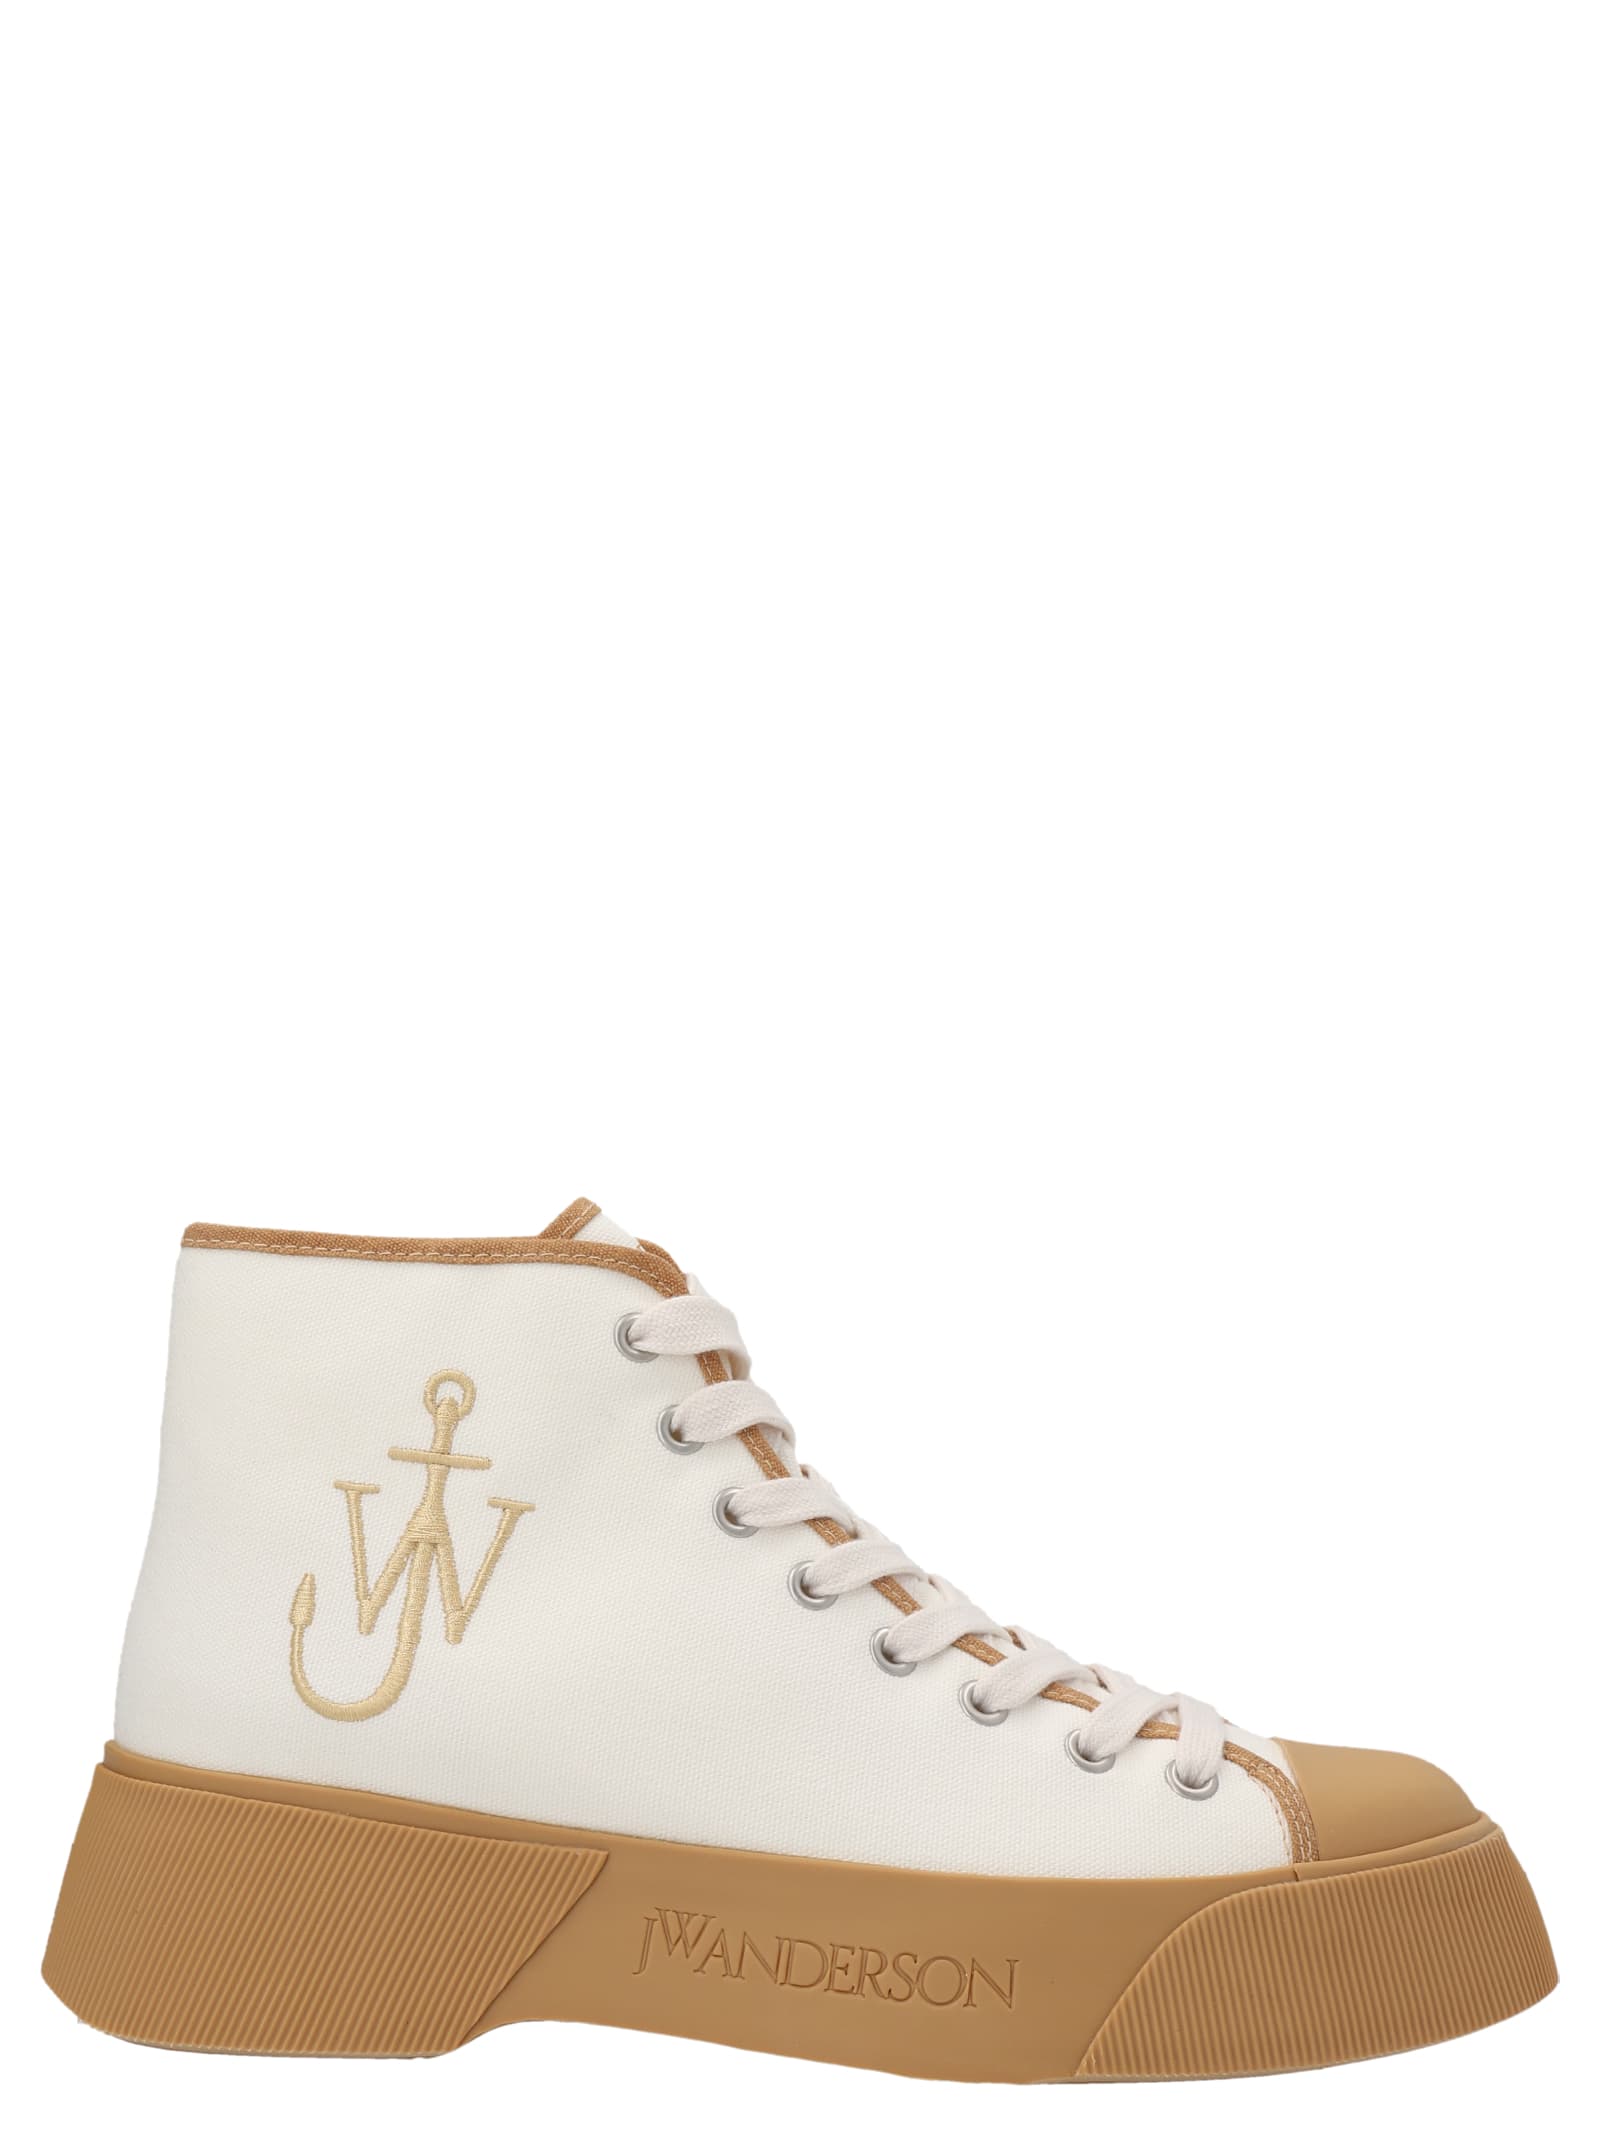 JW ANDERSON CANVAS SNEAKERS